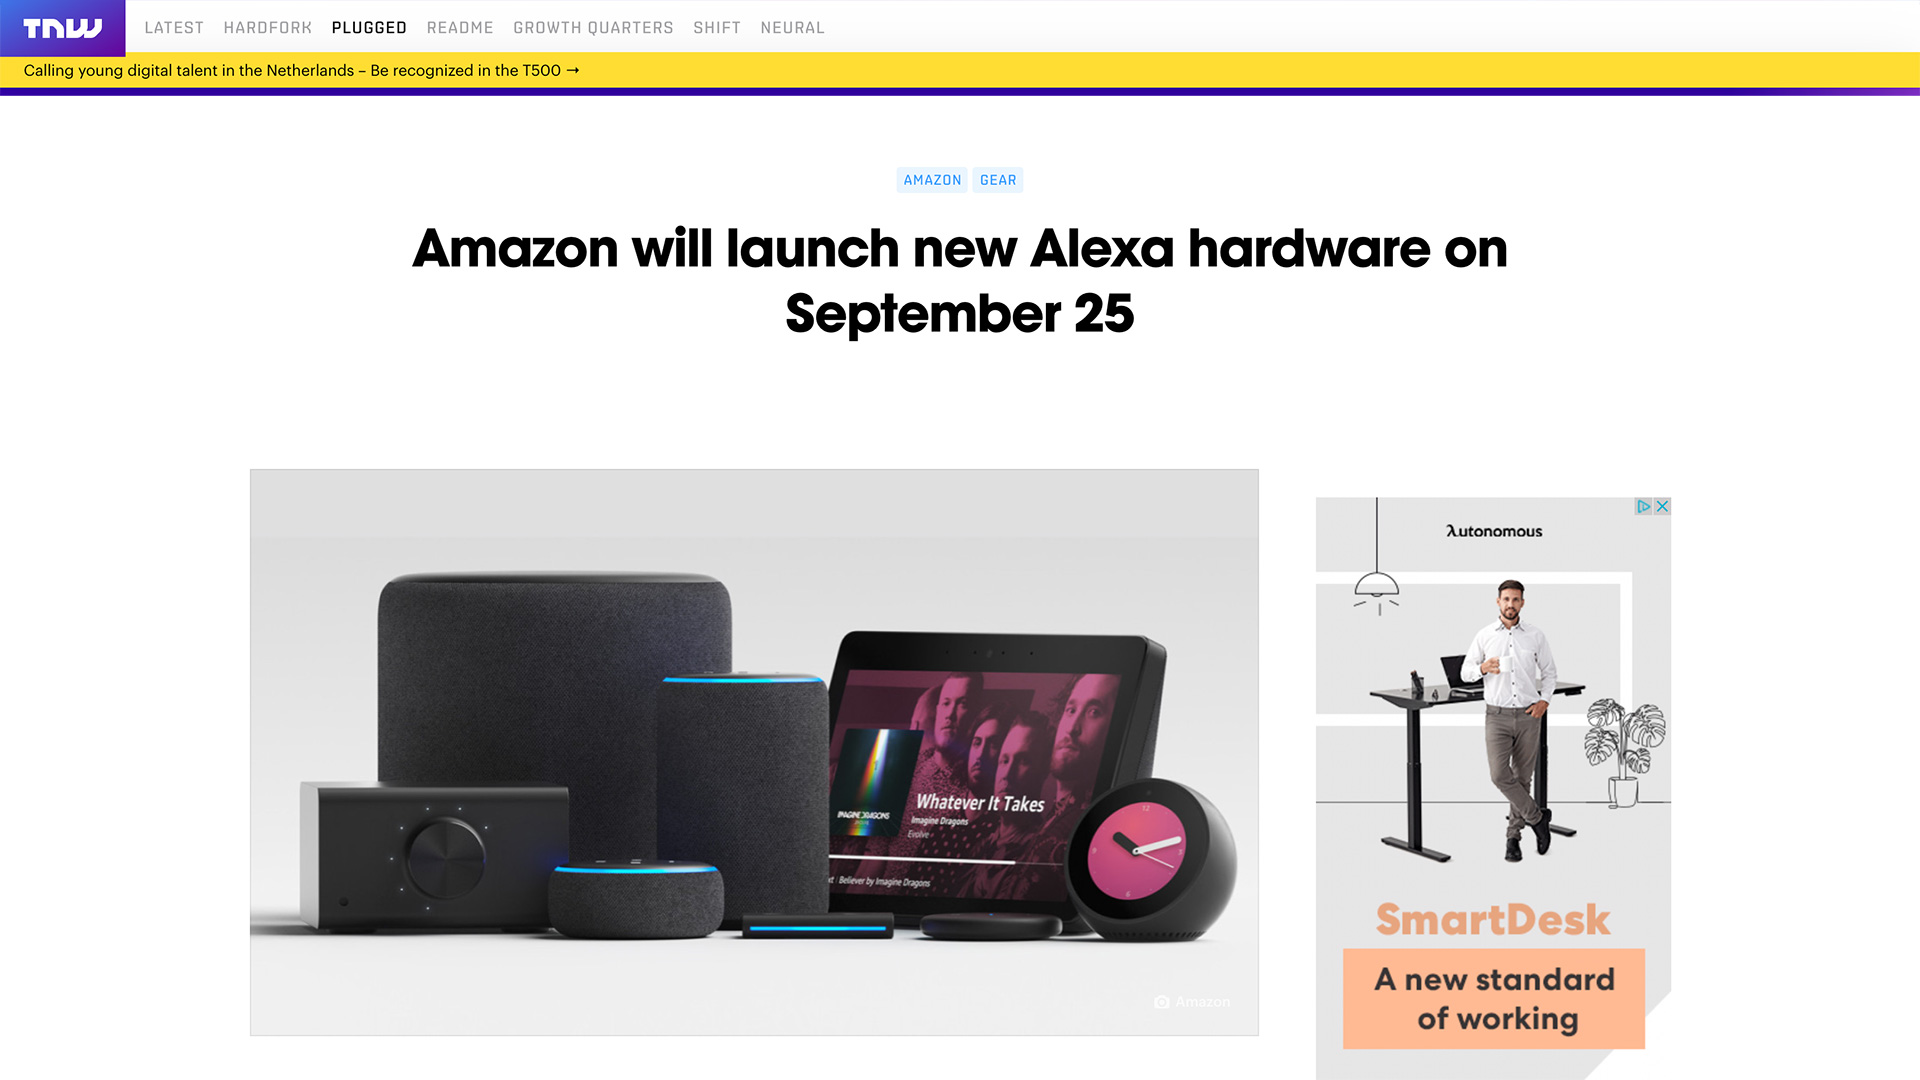 Article screenshot displaying Amazon devices.